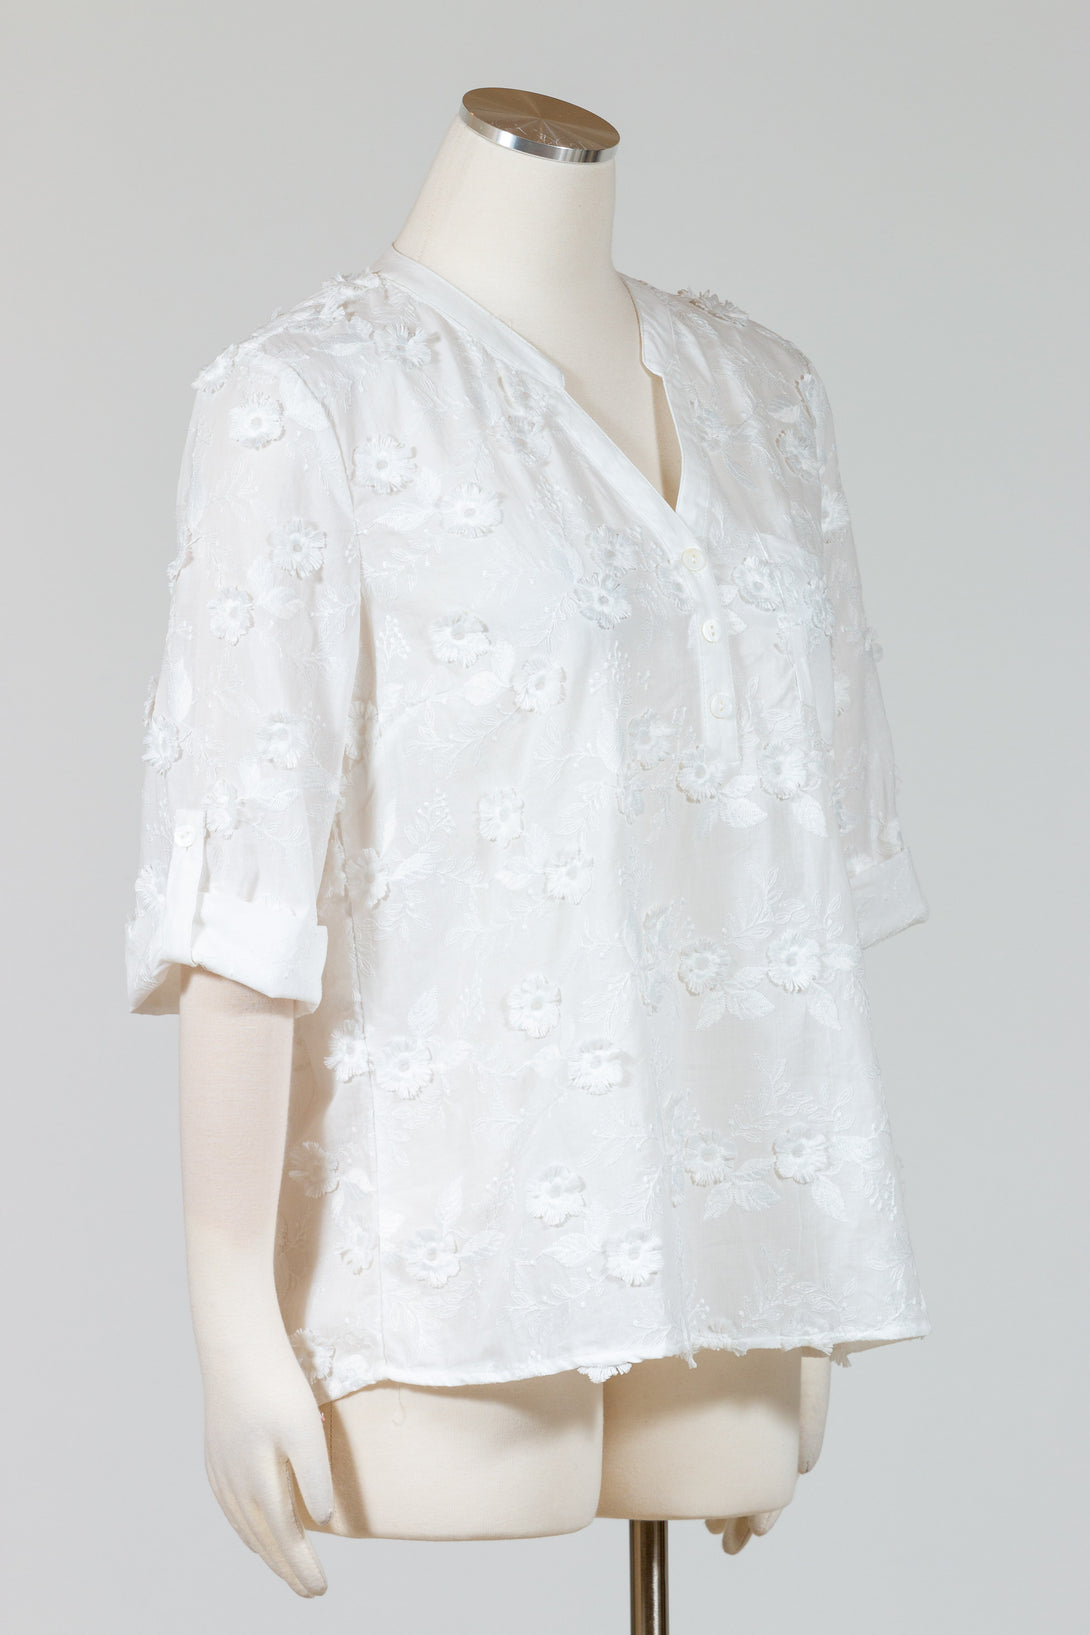 CharlieB-Embroidered-Blouse-White